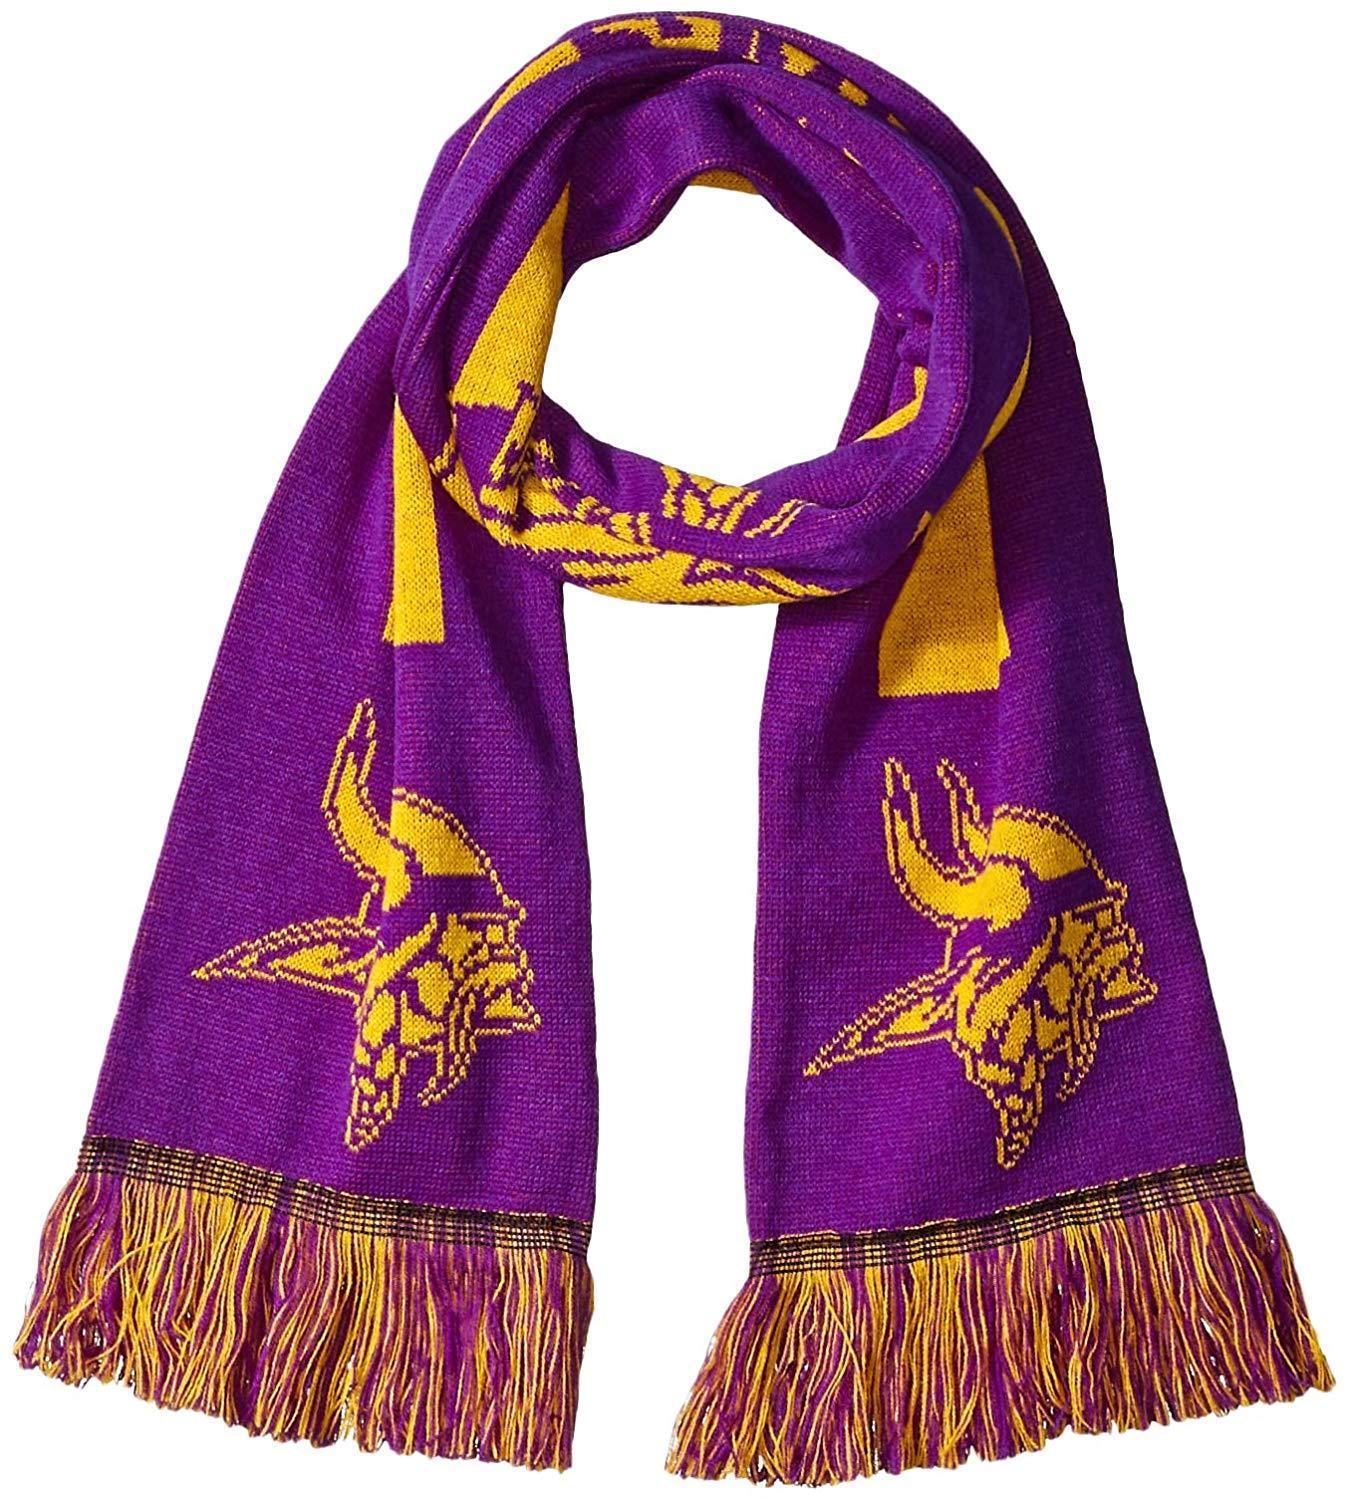 NFL Minnesota Vikings 2016 Big Logo Scarf 64"x6" by Forever Collectibles - $26.95